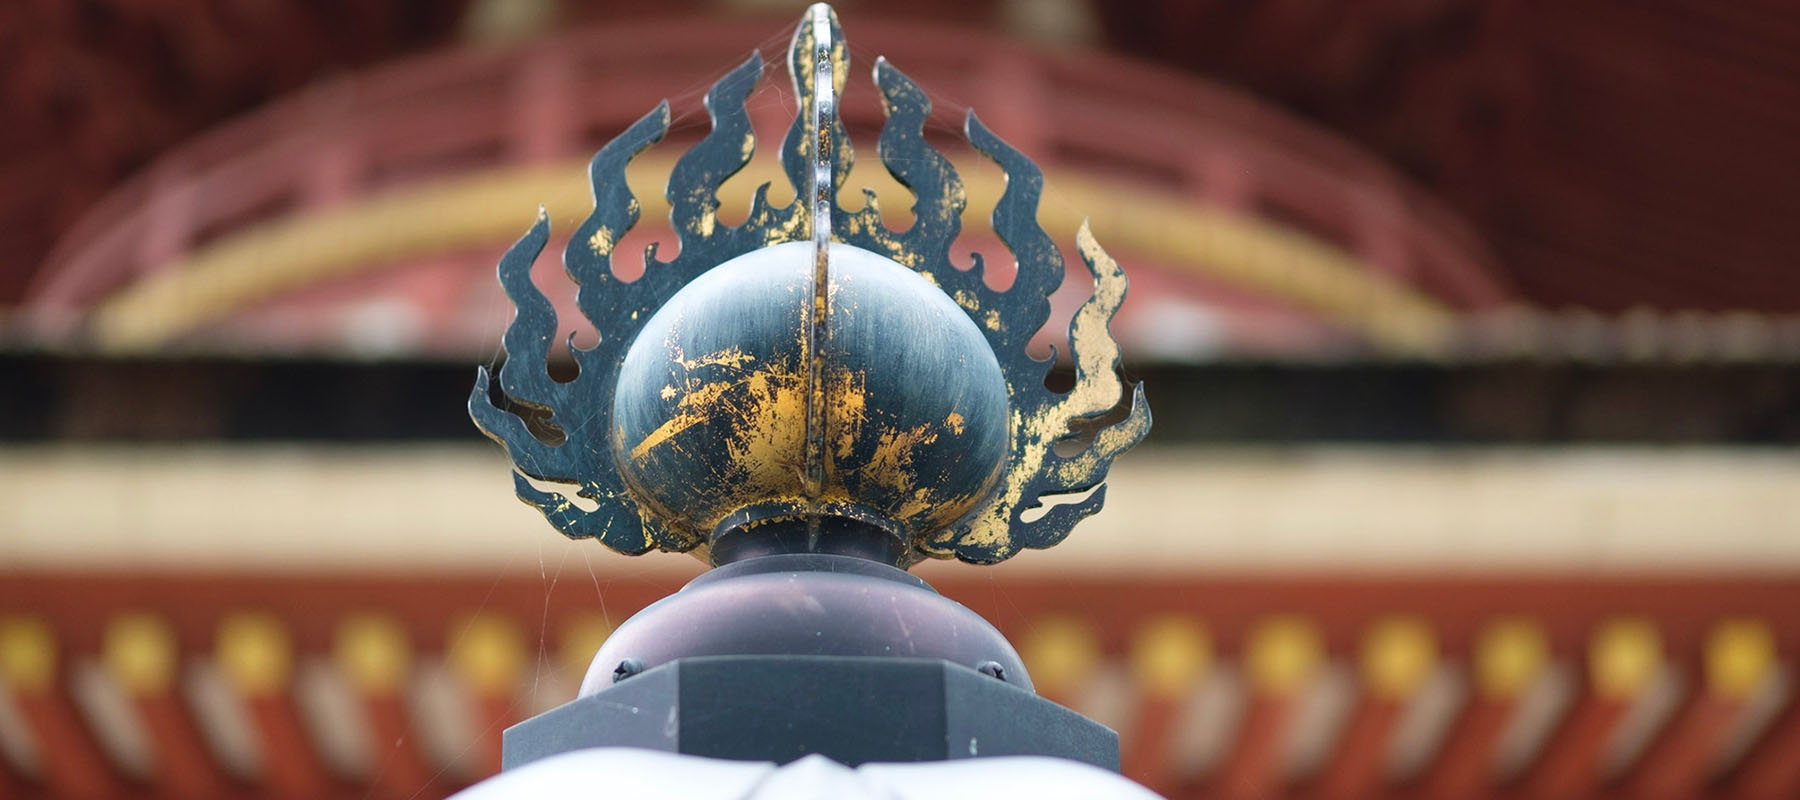 up close of temple roof ornament at Japan's Mt. Koya